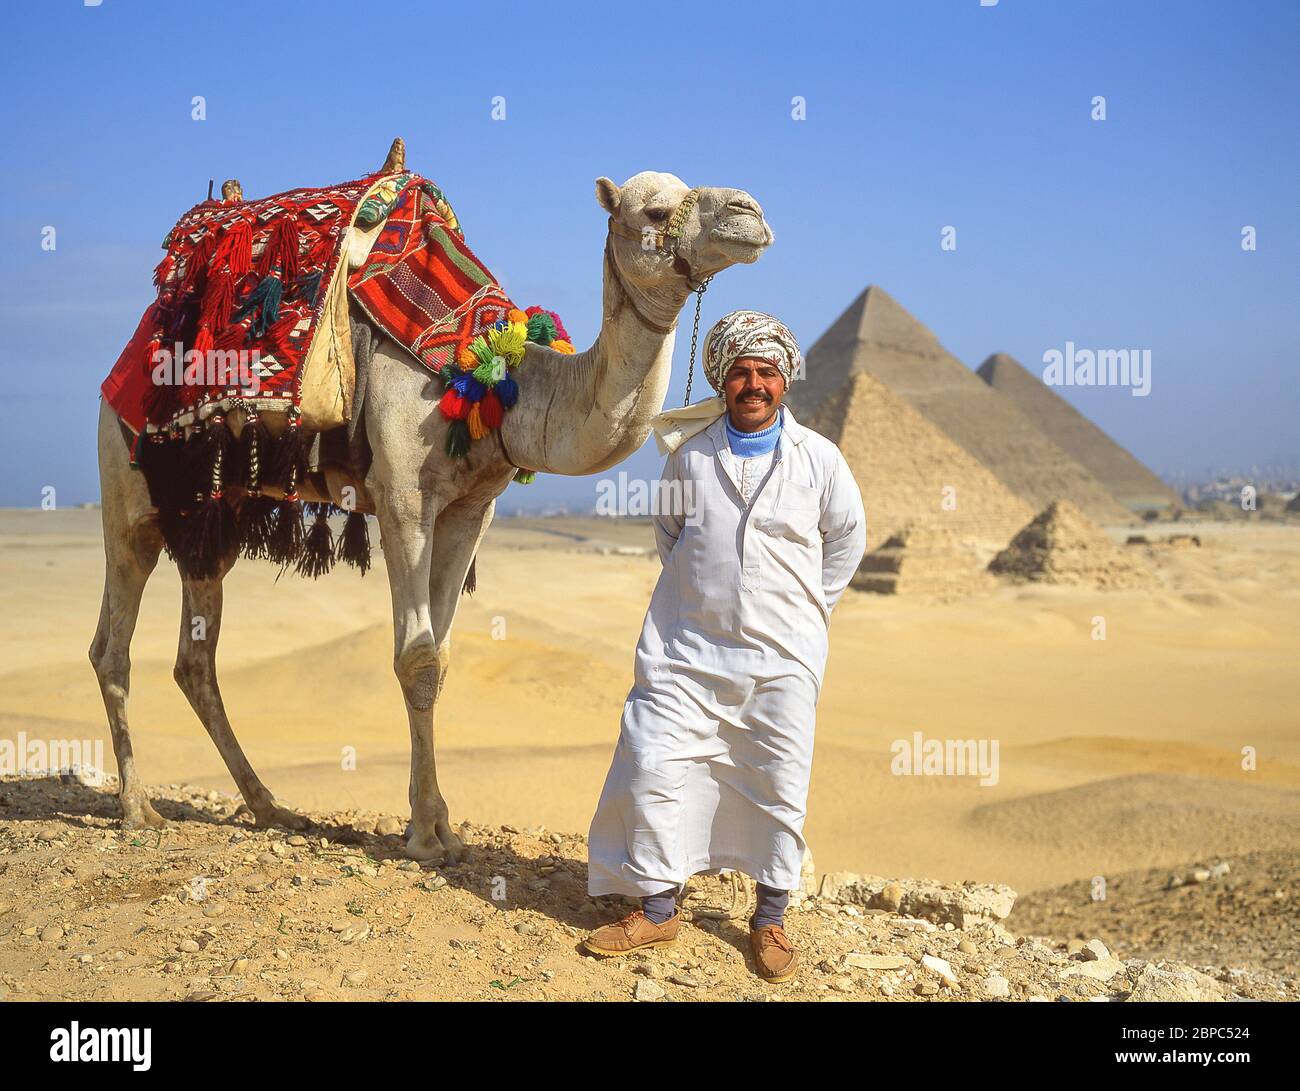 Camel driver with decorated camels, The Great Pyramids of Giza, Giza, Giza Governate, Republic of Egypt Stock Photo